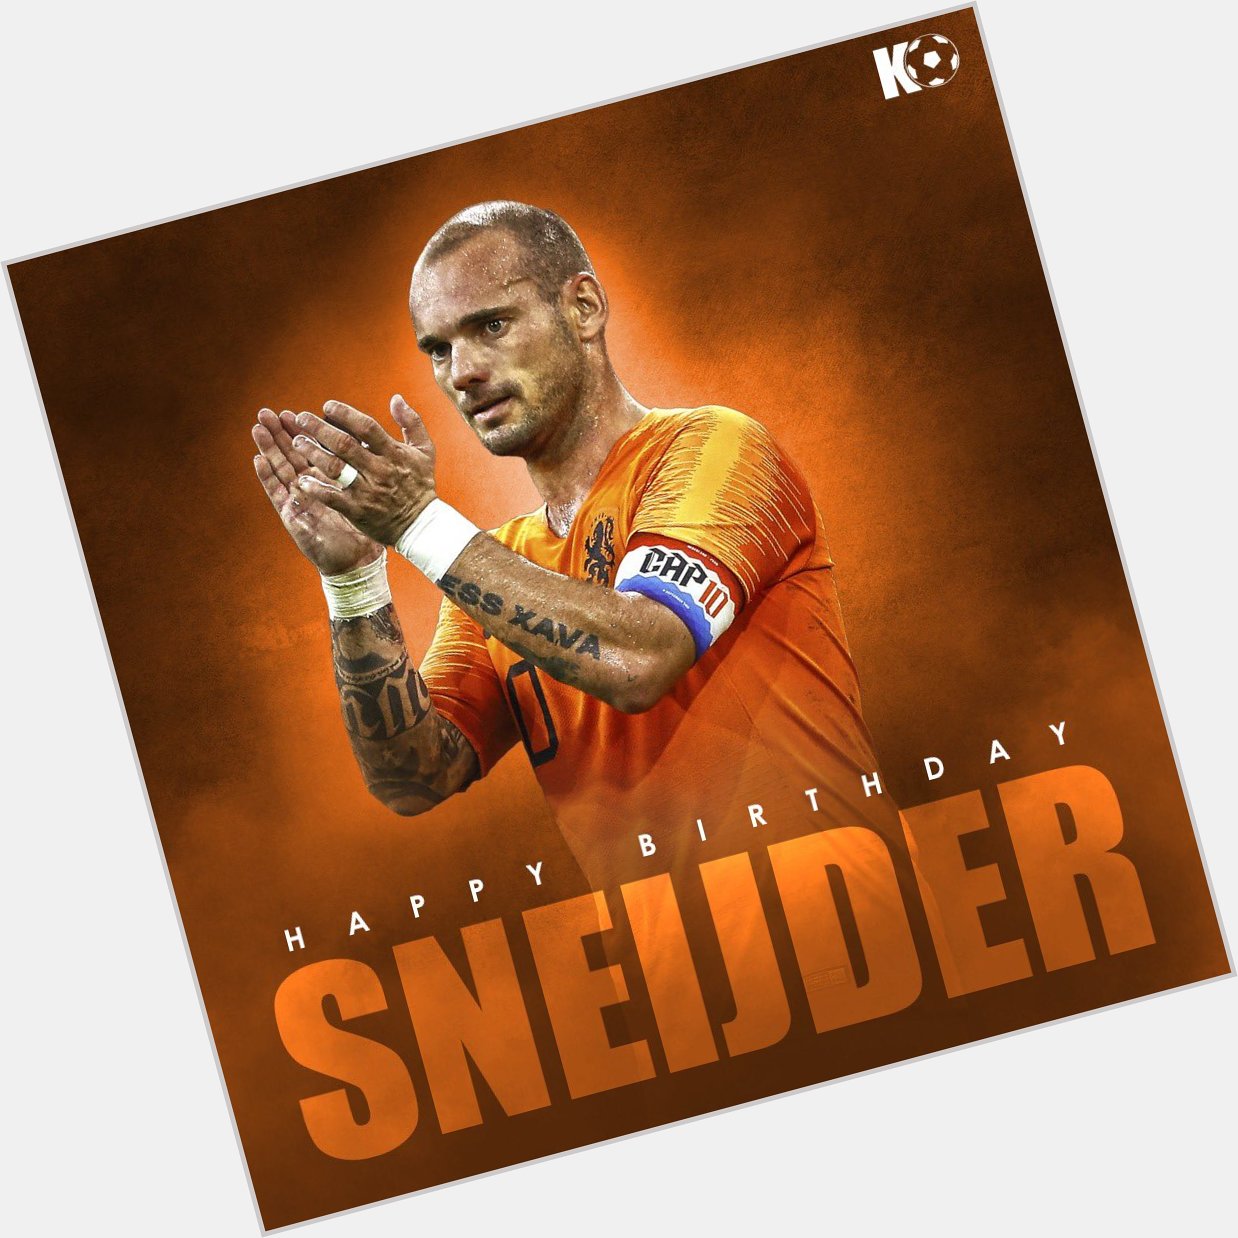 Join in wishing Wesley Sneijder a Happy birthday! 